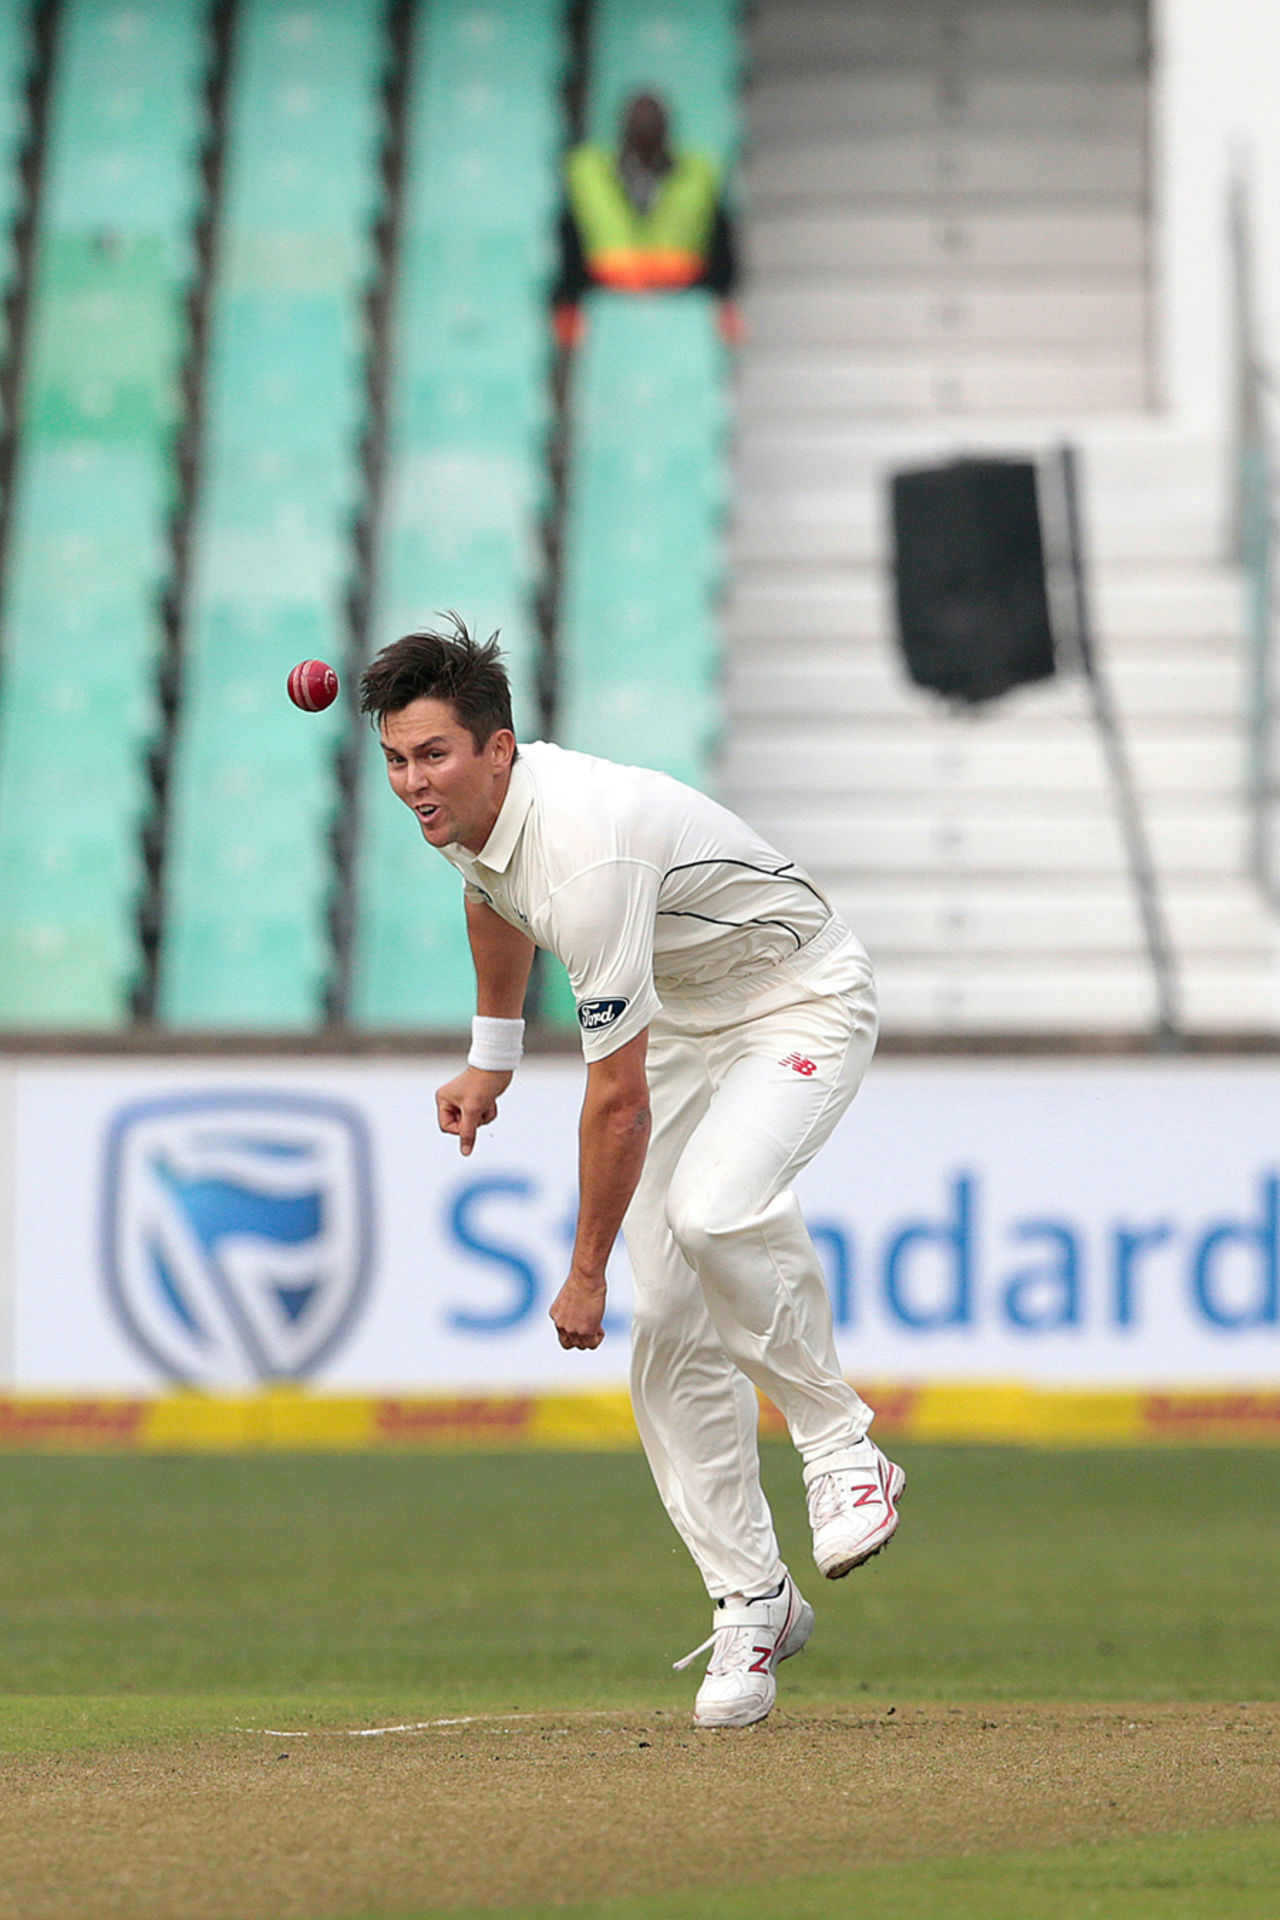 Trent Boult releases a delivery during a testing opening spell, South Africa v New Zealand, 1st Test, Durban, 1st day, August 19, 2016